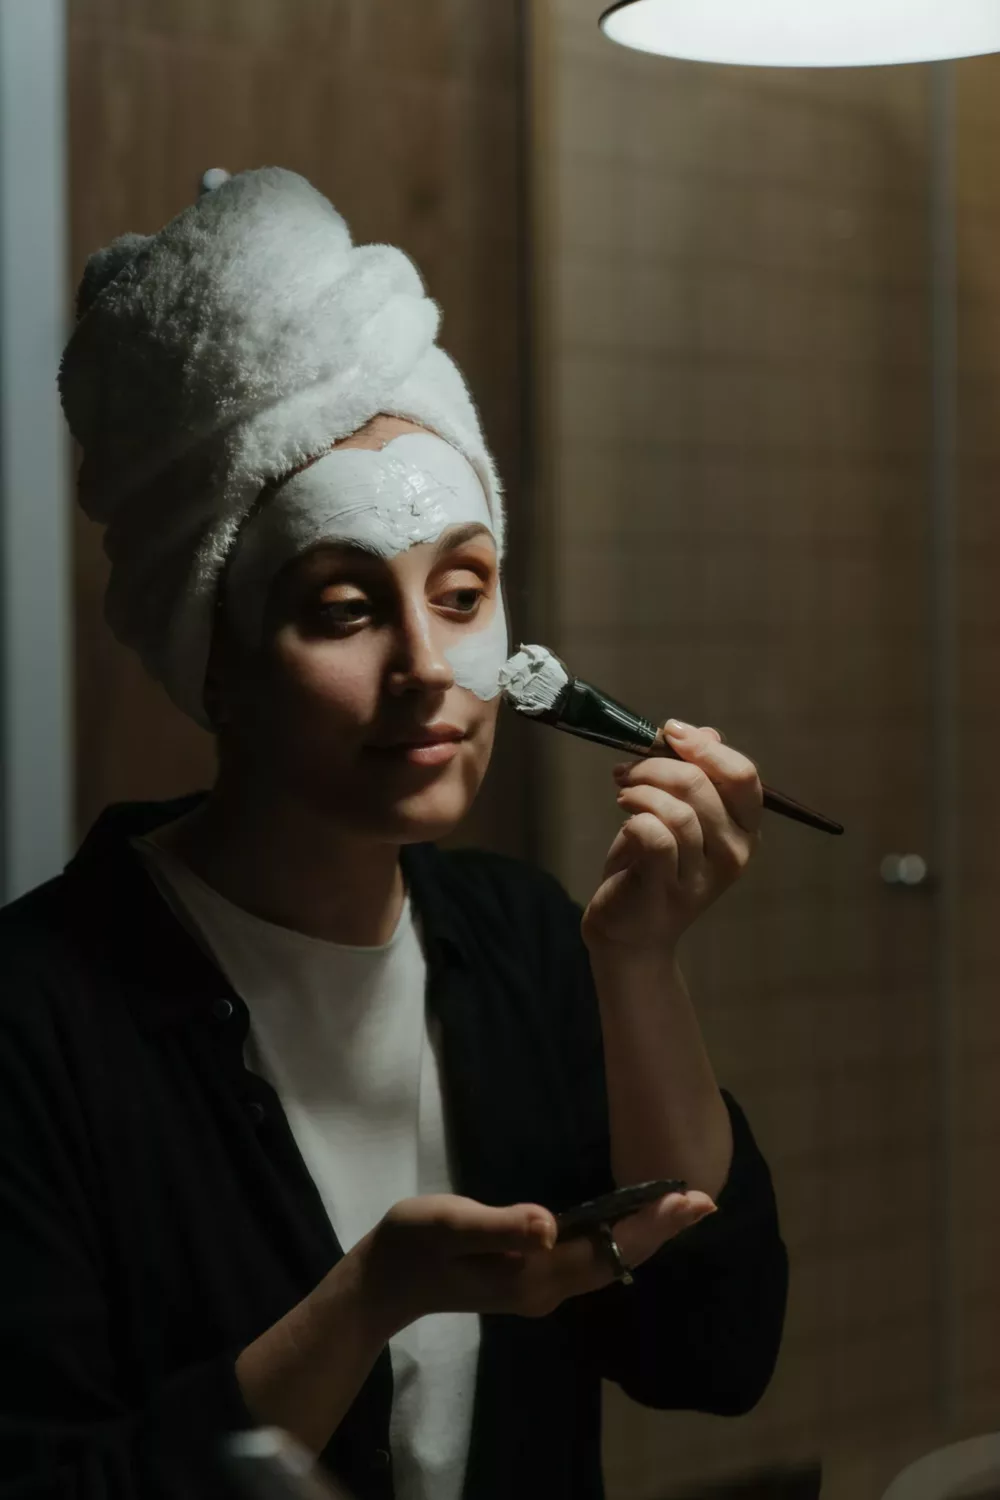 using a brush to apply exfoliant to the face